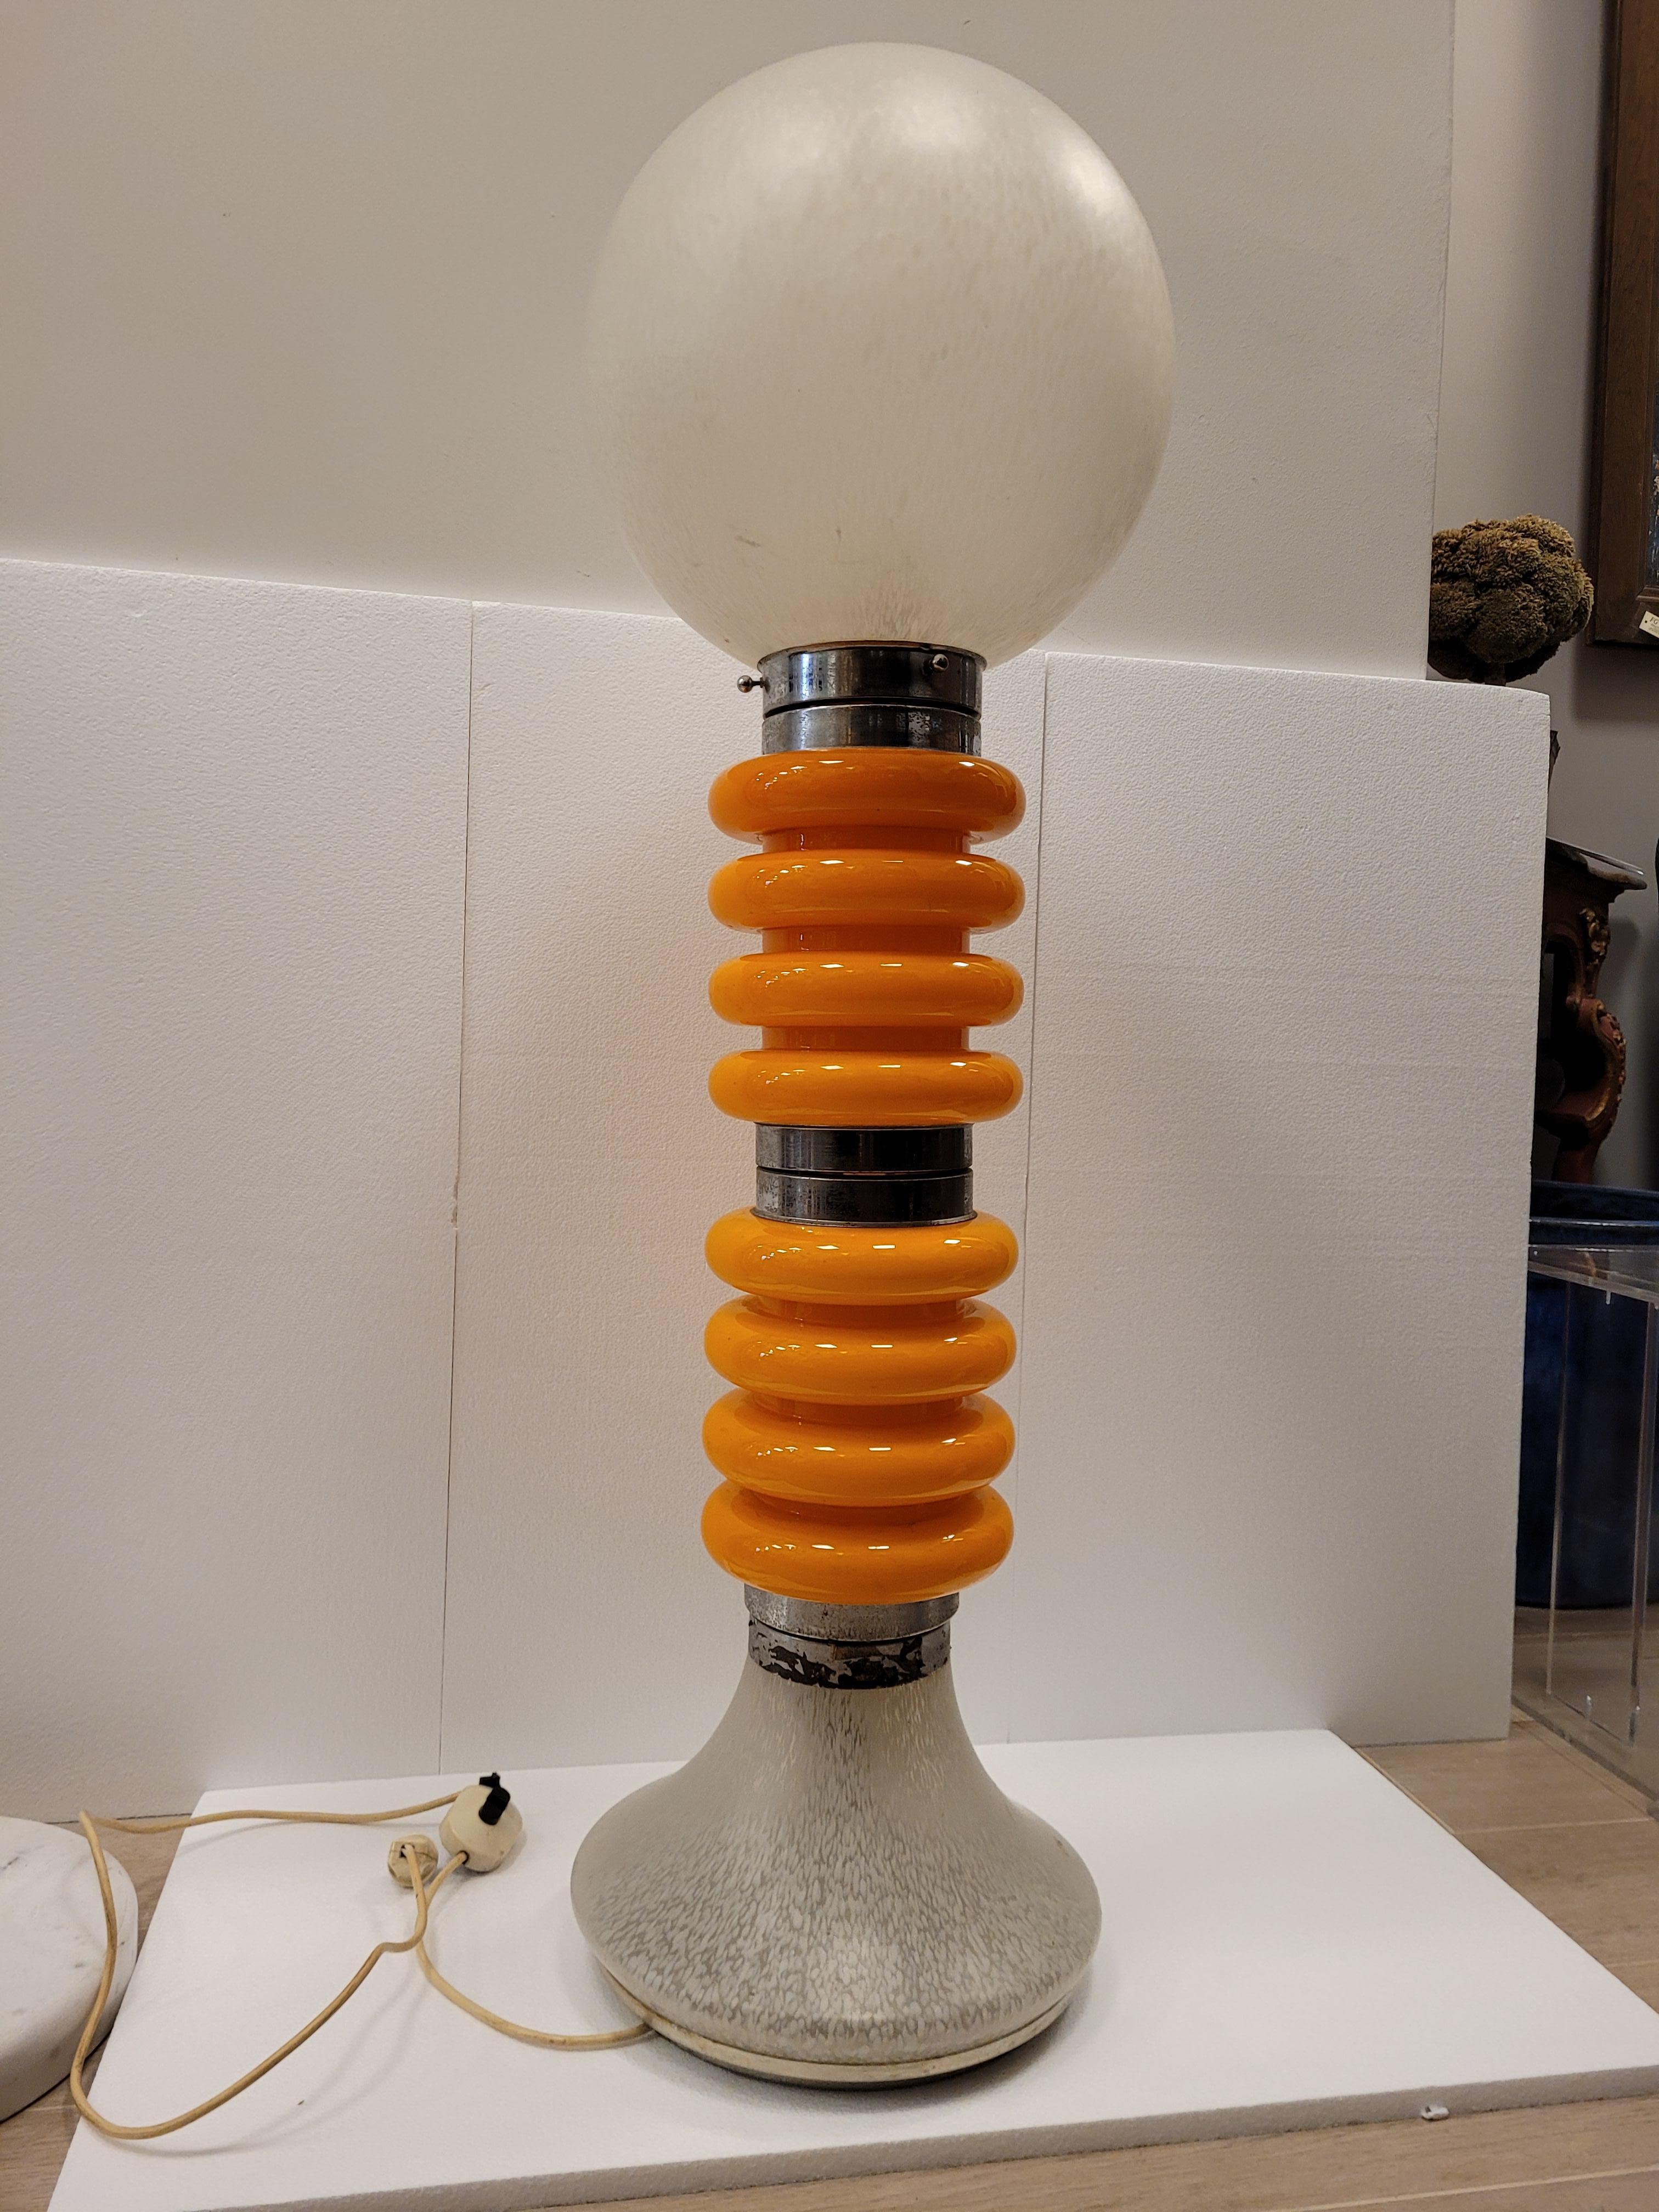 Beautiful and large floor lamp in white and orange Murano glass, design attributed to Carlo Nason for Mazzega, Murano, Italy, 60s, Space Age style. base, shaft and final globe in glass alternating with rings of bright orange glass and polished